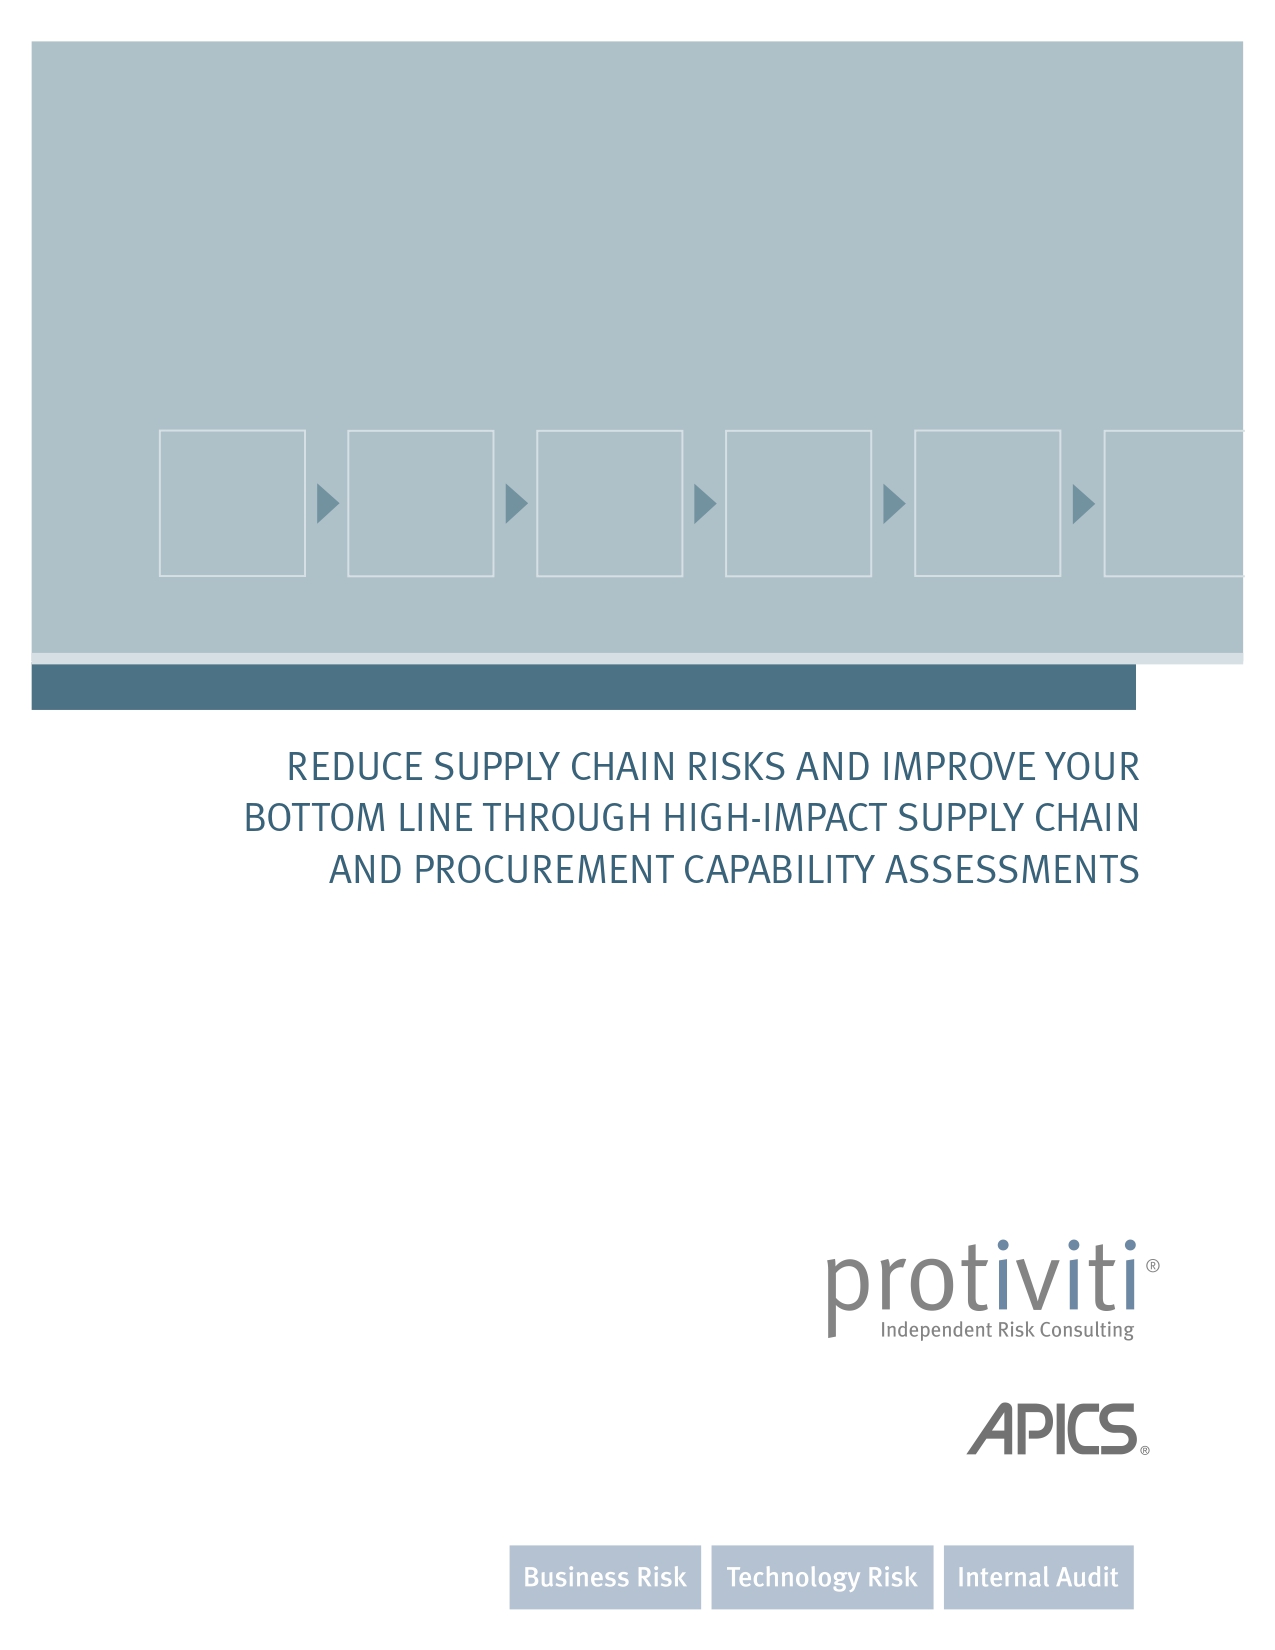 Screenshot of the first page of Reduce Supply Chain Risks and Improve Your Bottom Line.